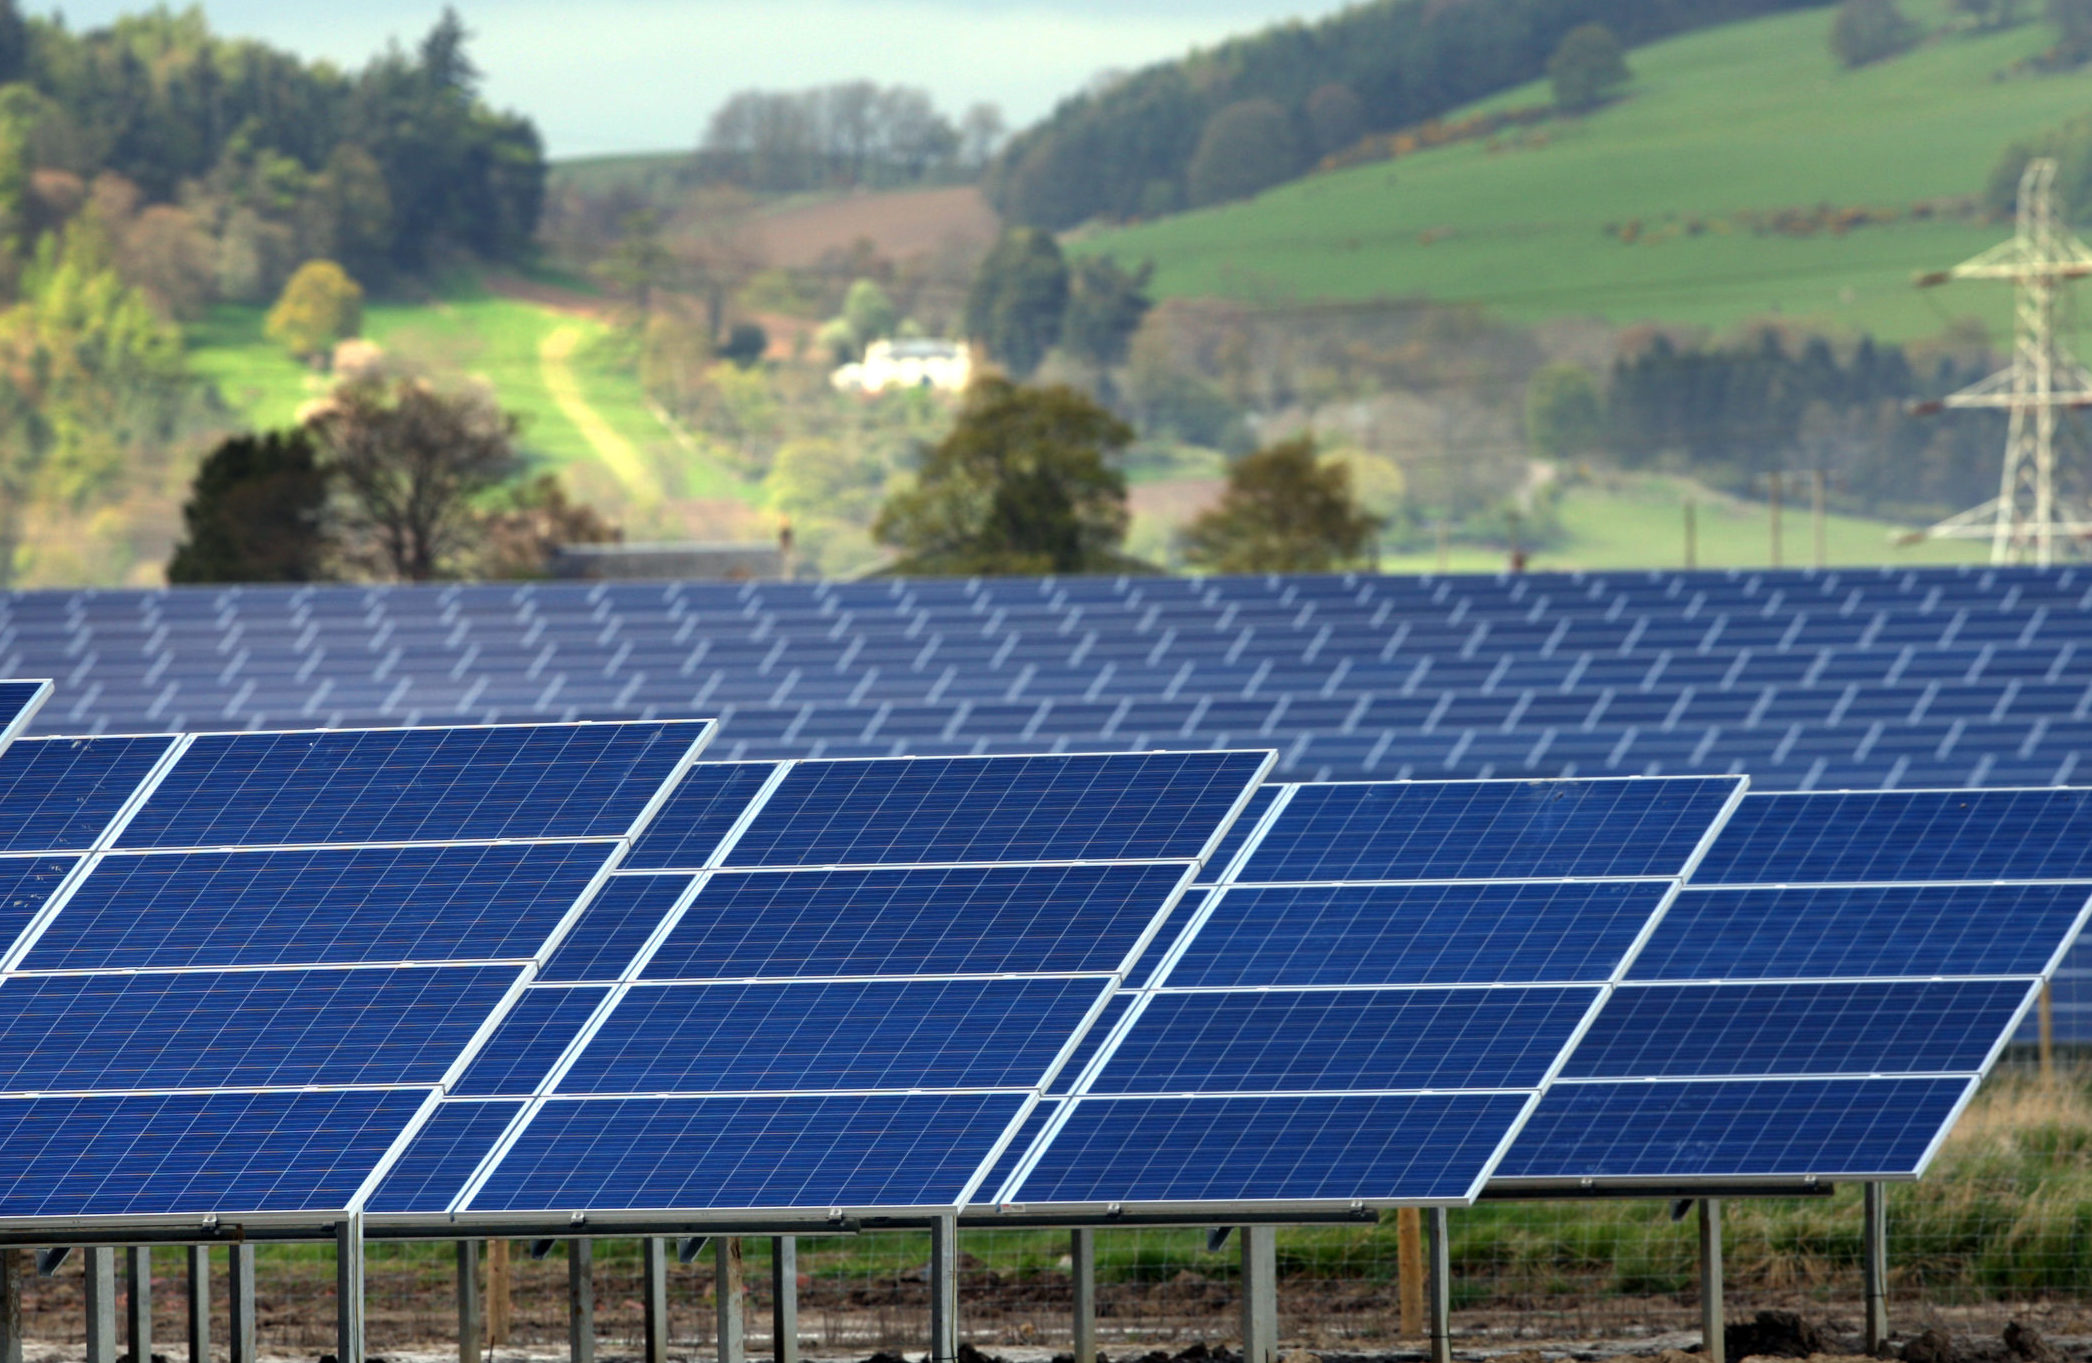 Solar energy can provide a stable source of income for landowners.